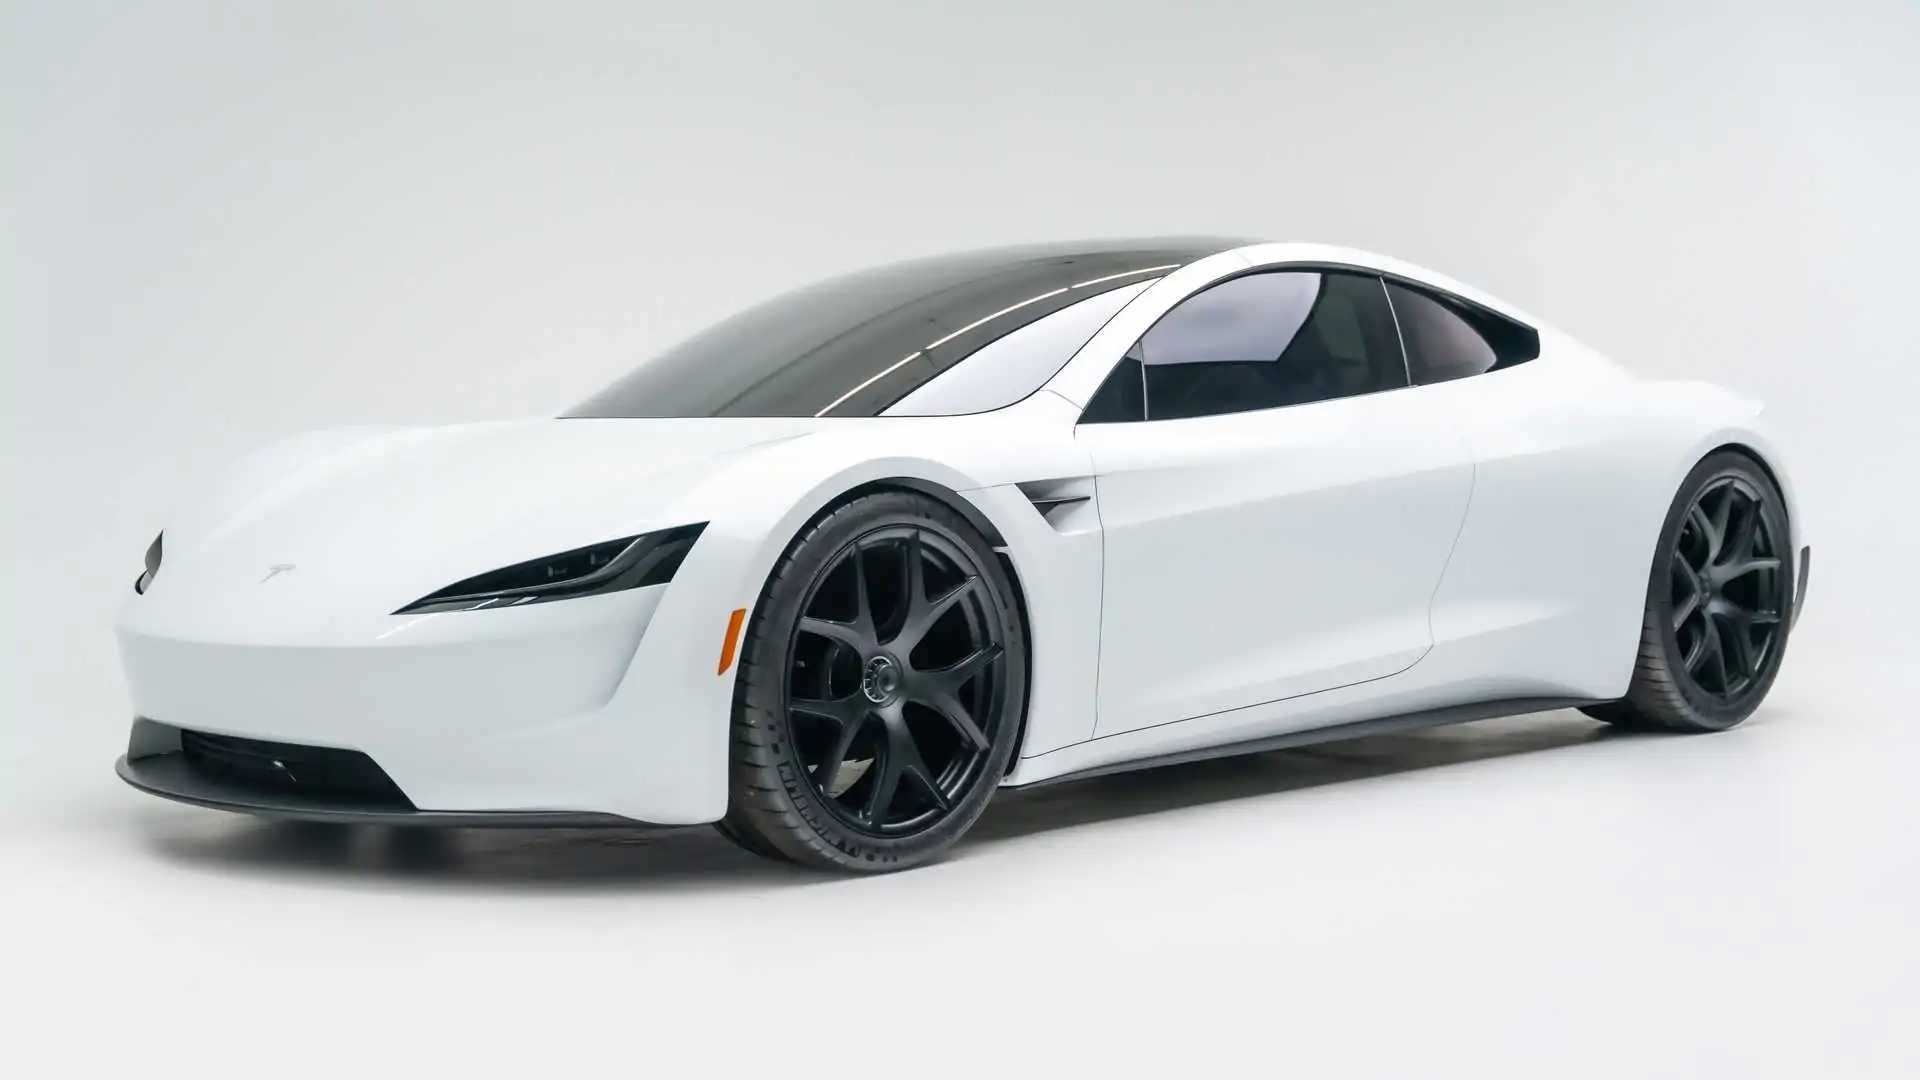 Elon Musk Claims The New Tesla Roadster Hits 60 MPH In Less Than One